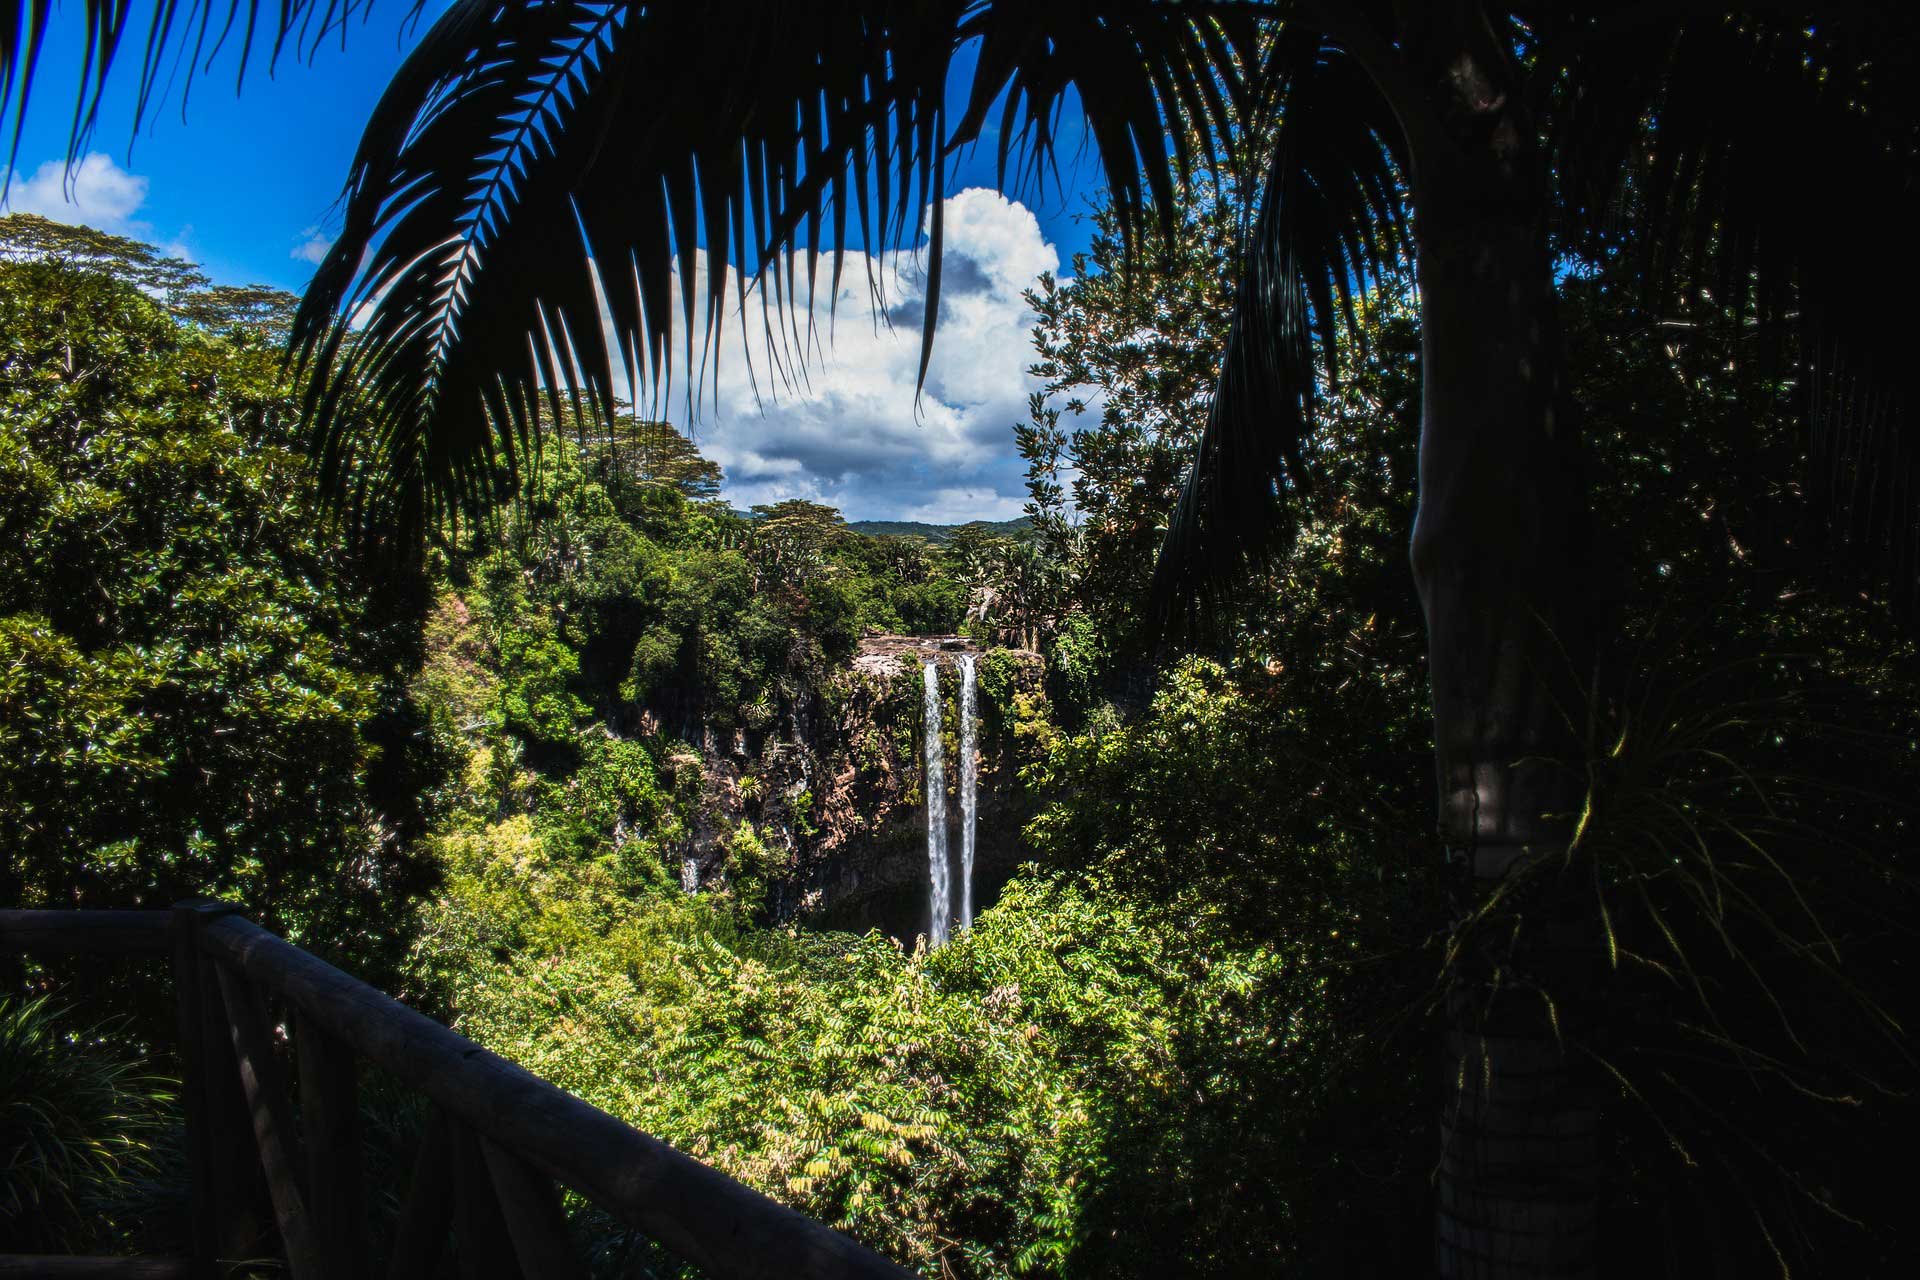 Jungle scene with palms and a waterfall